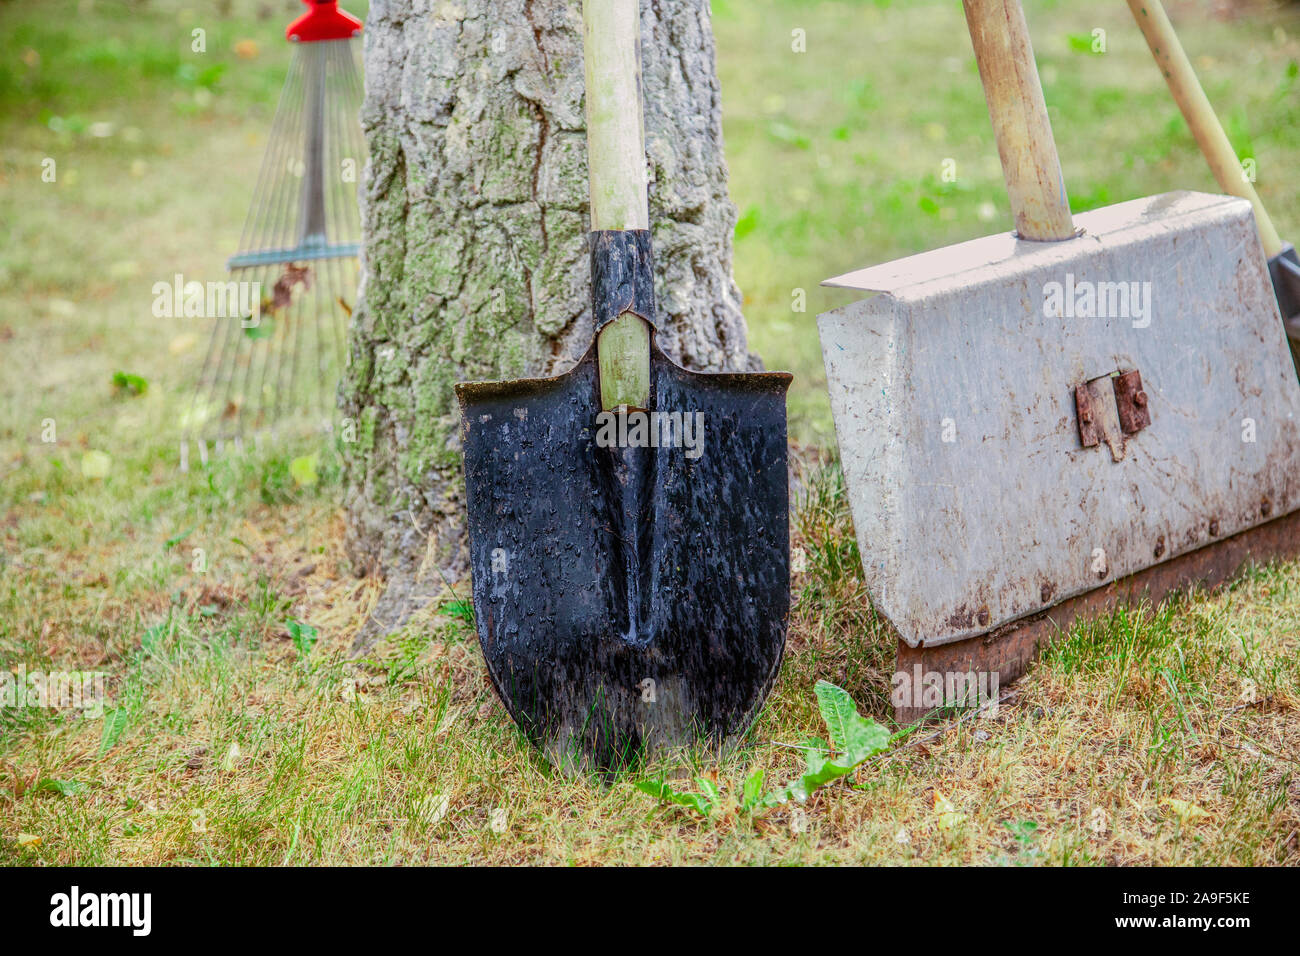 A shovel is standing by a tree. The gardener left the tools. Metal blades and wooden stick. Tooling for digging the earth. Stock Photo